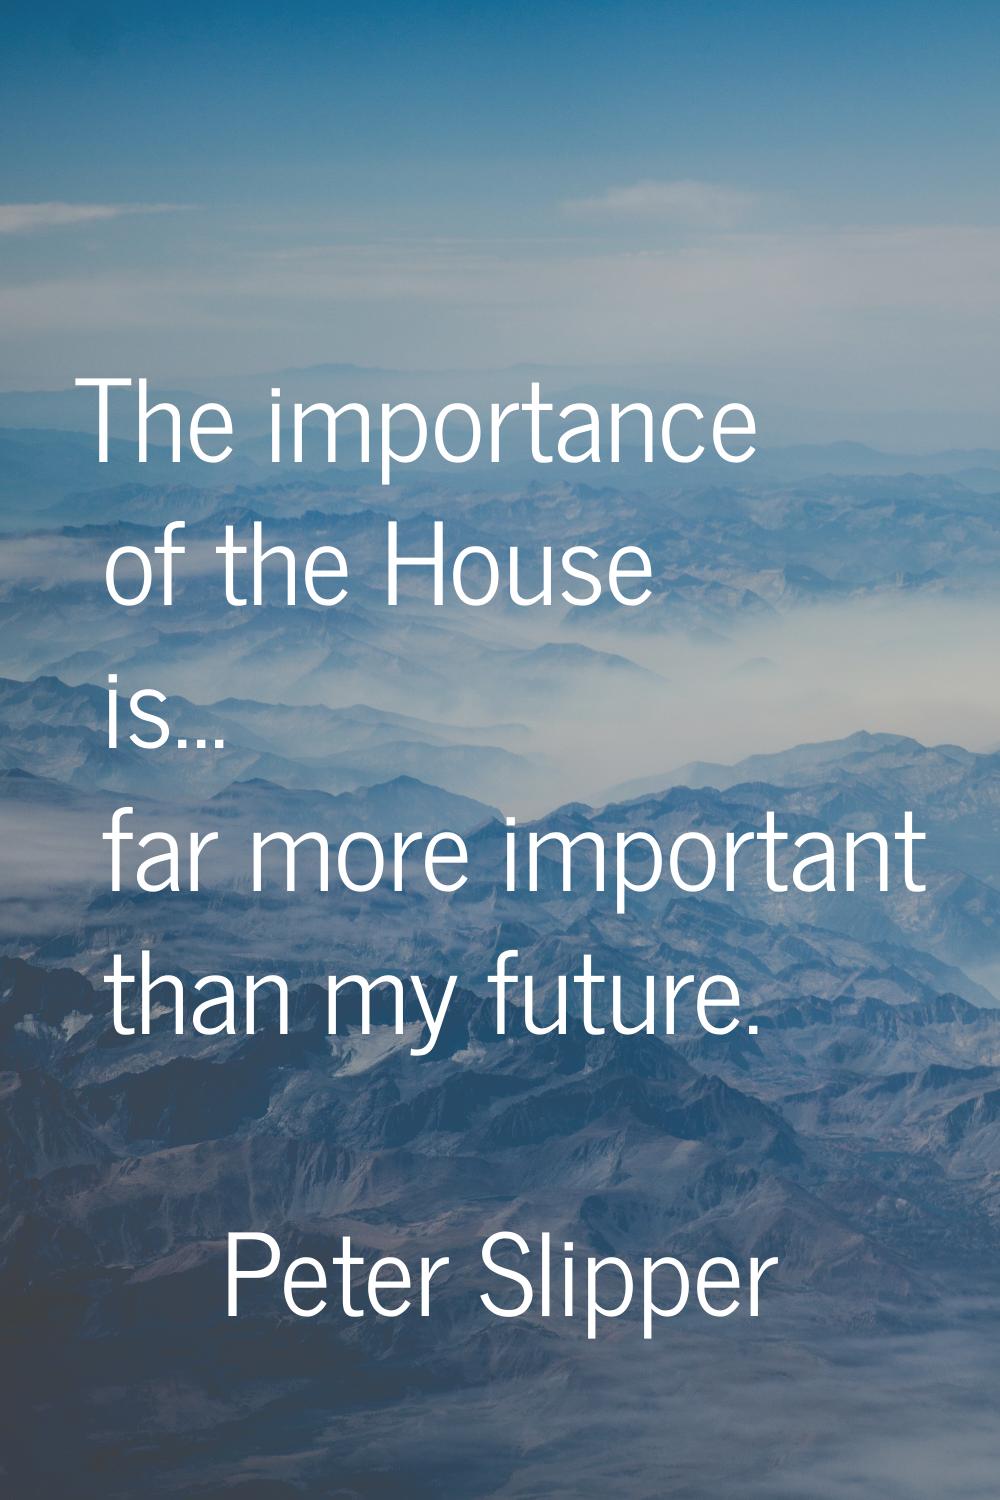 The importance of the House is... far more important than my future.